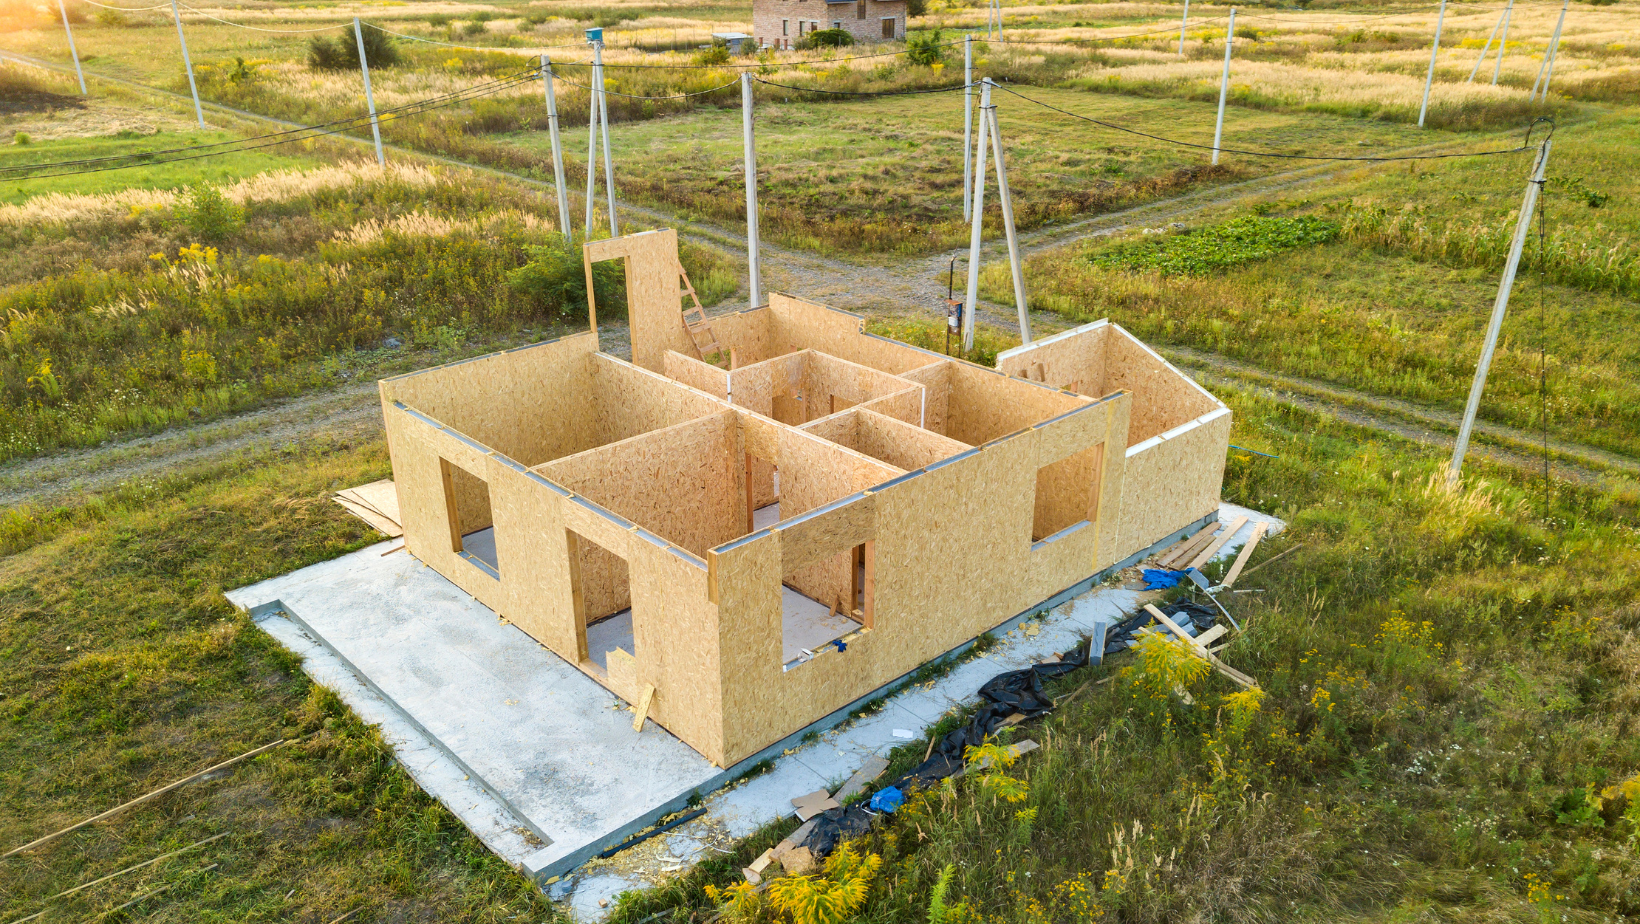 What to avoid when leasing a modular building